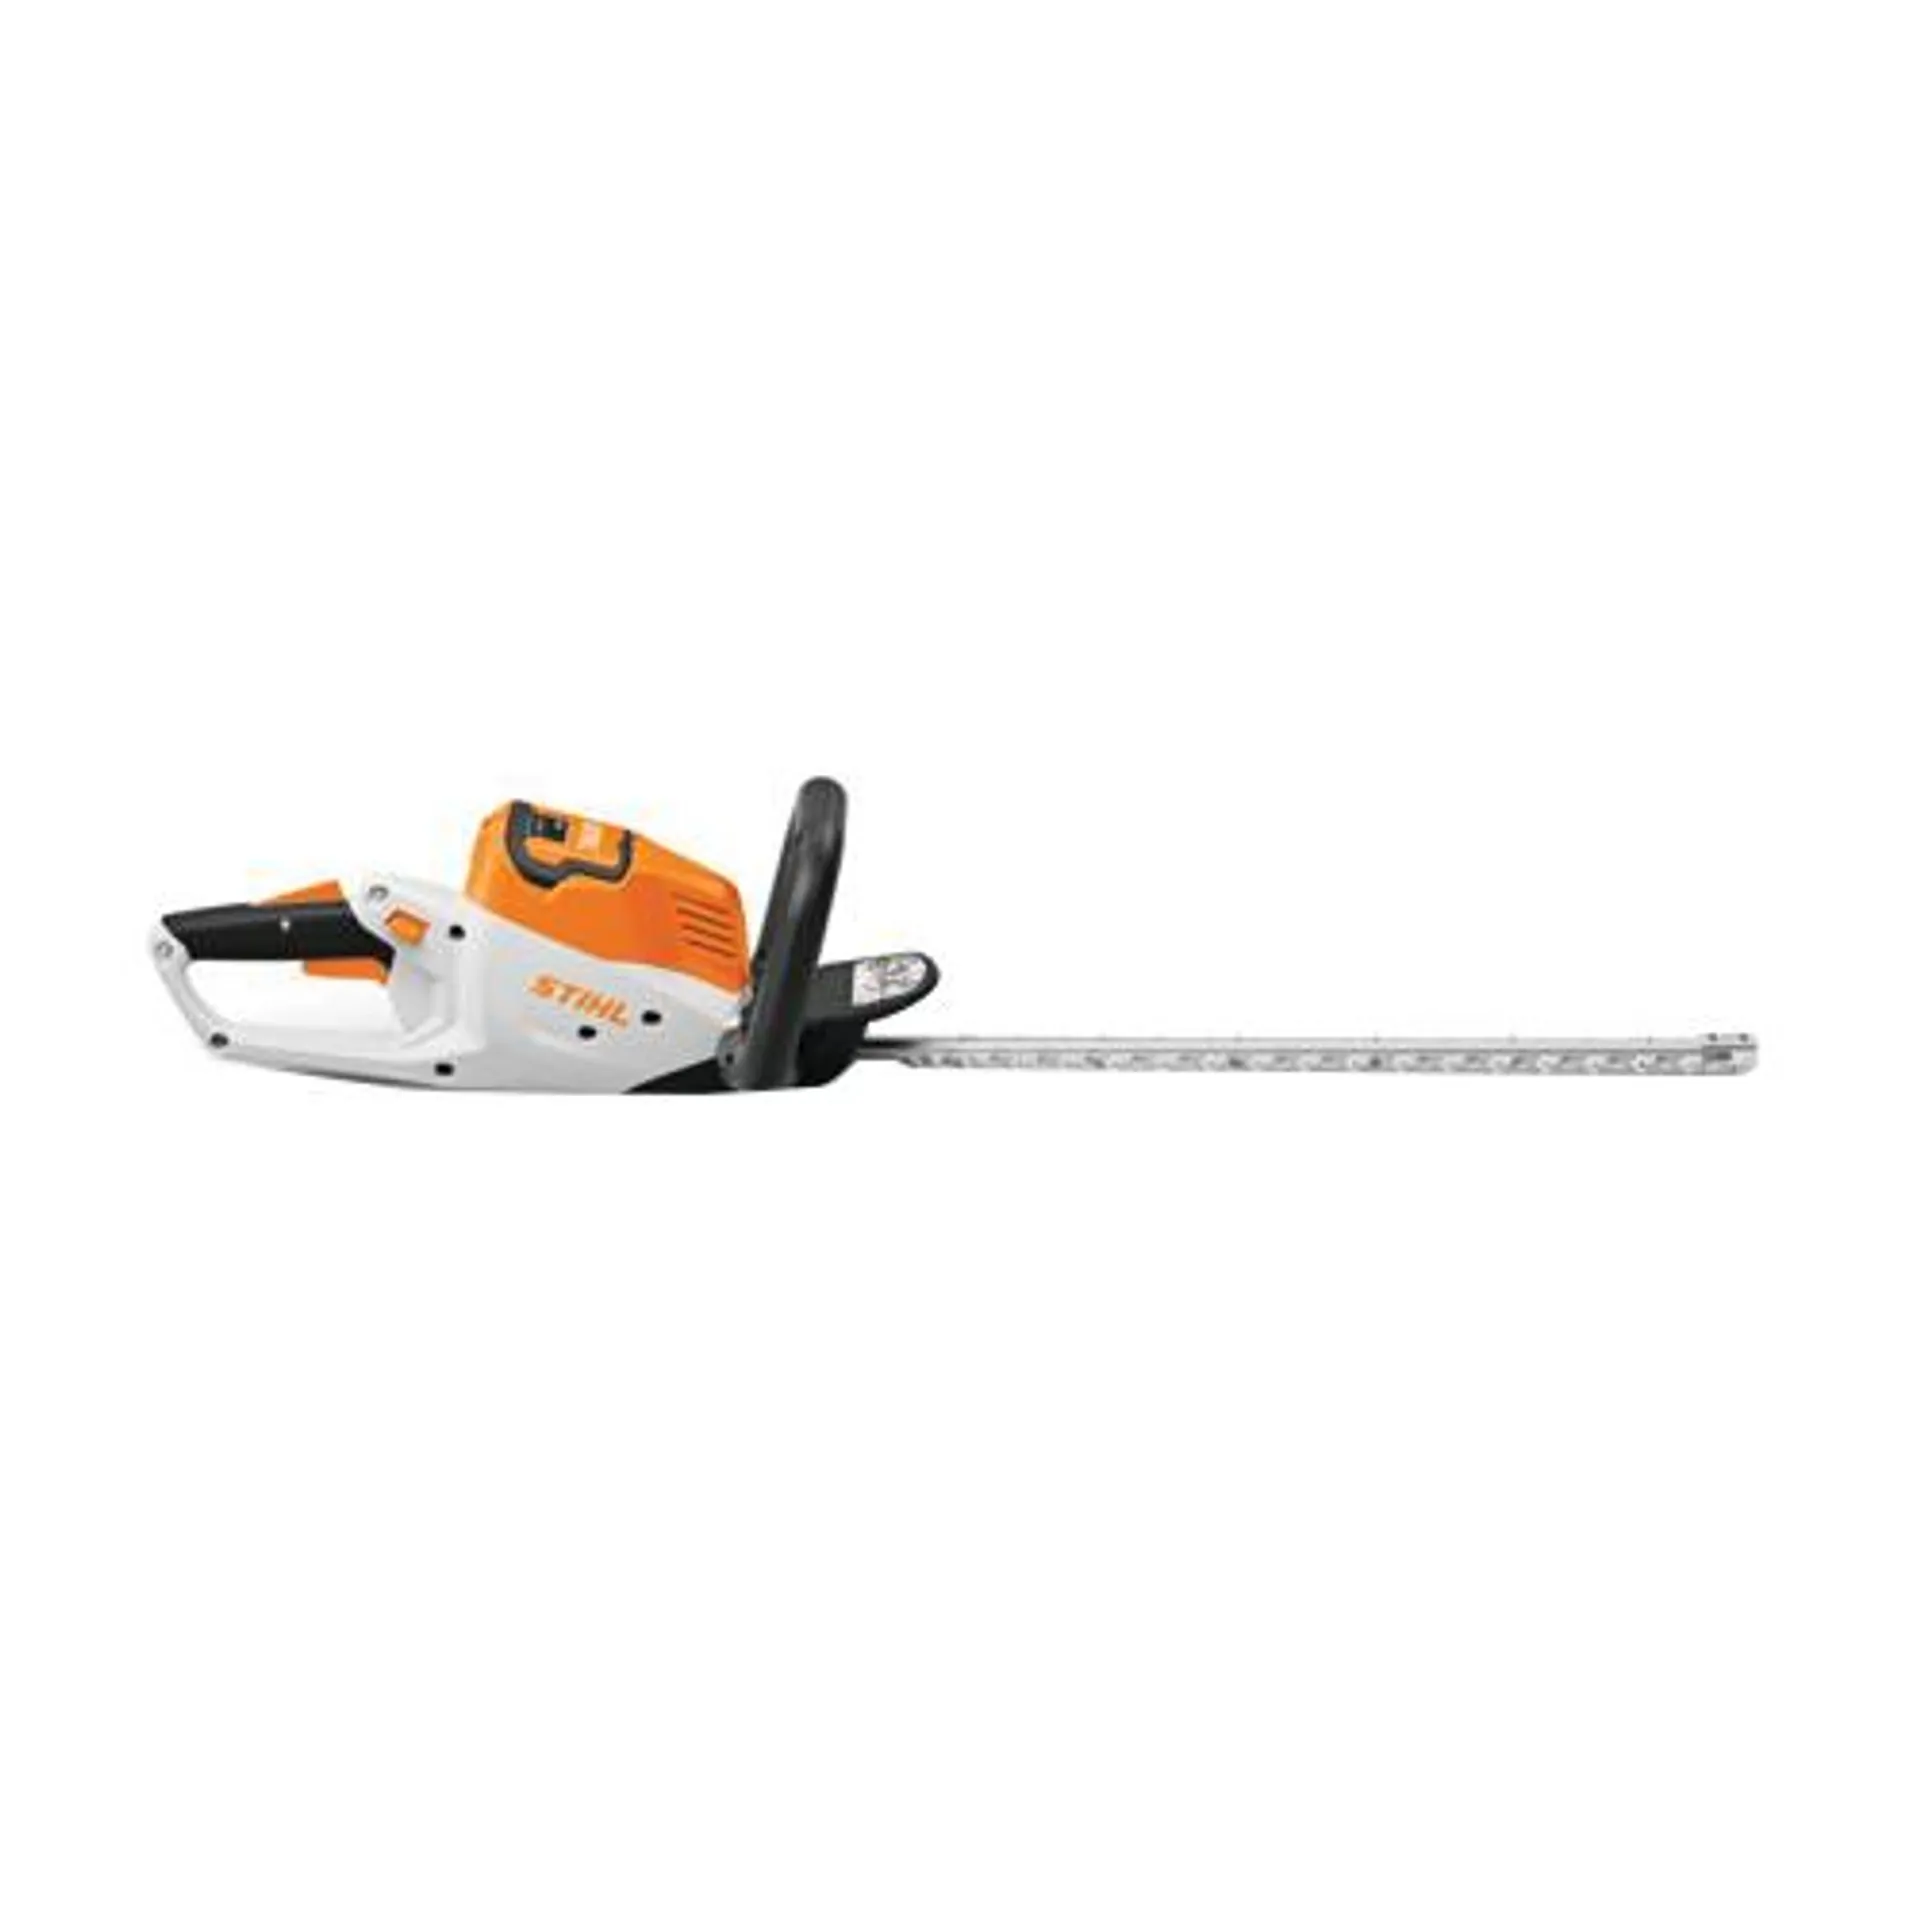 45210113541US Cordless Hedge Trimmer, Battery Included, 36 V, Lithium-Ion, 50 cm Cutting Capacity, 20 in Blade